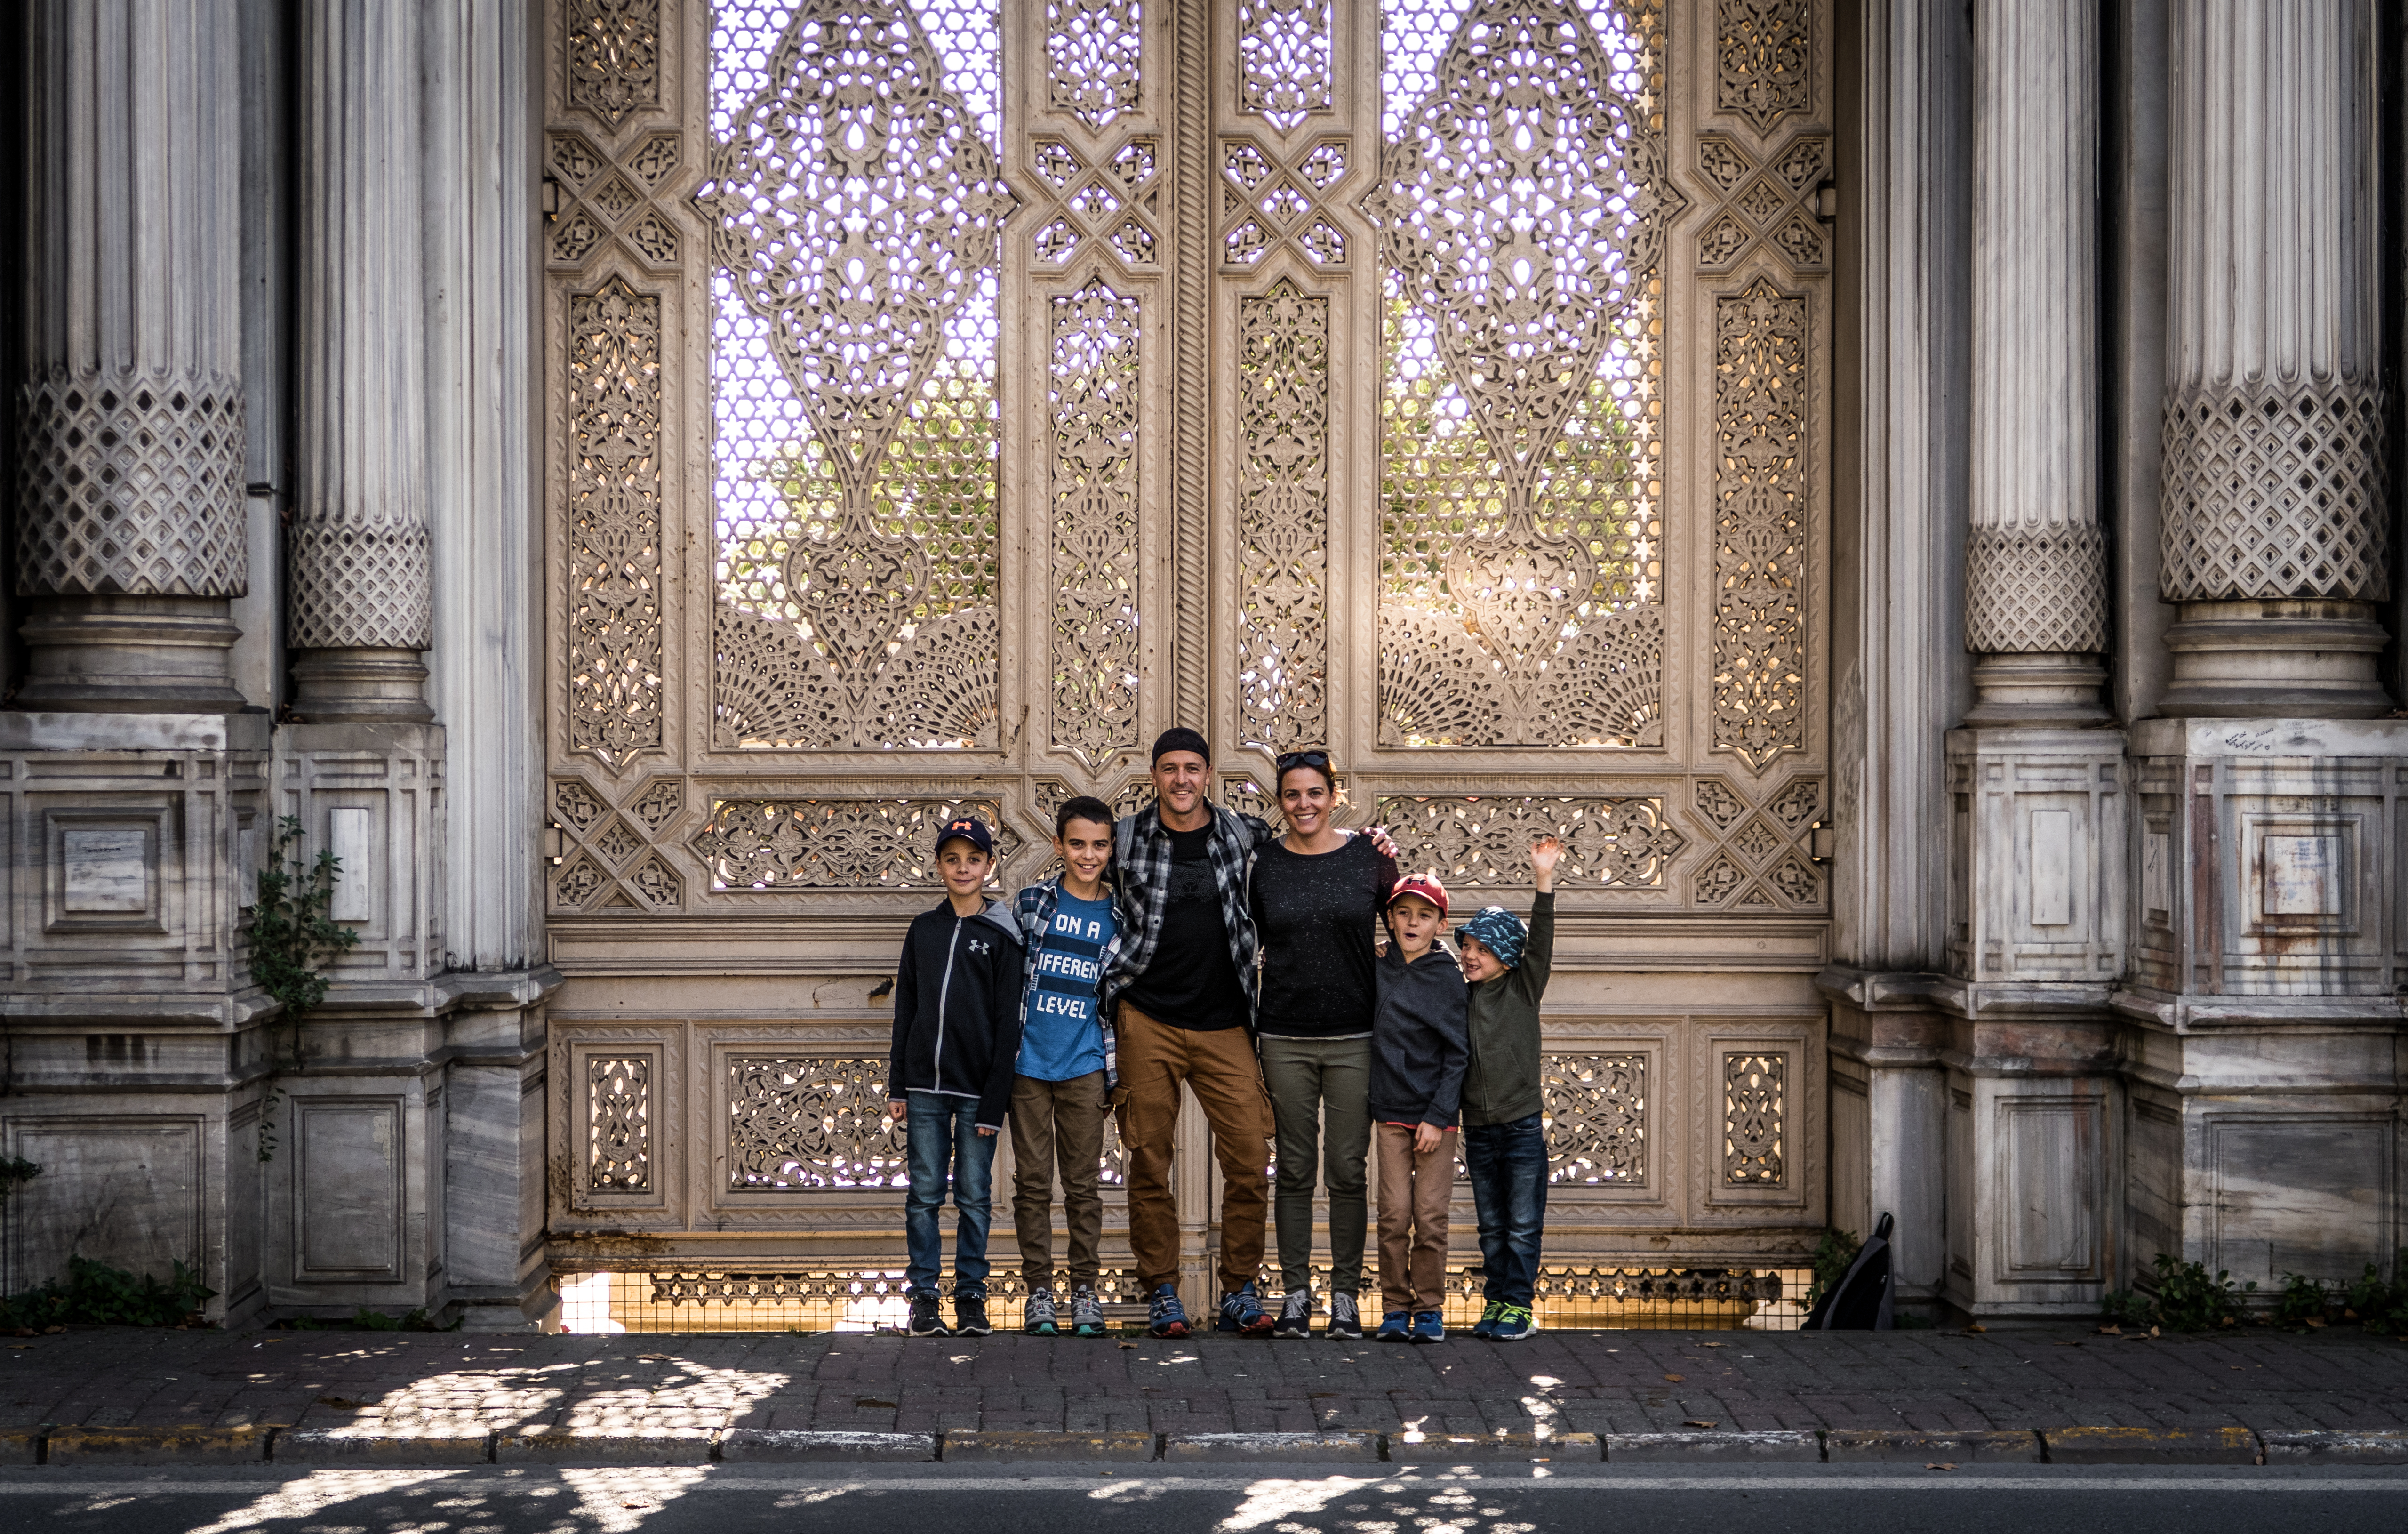 A Western family's first impressions of Istanbul